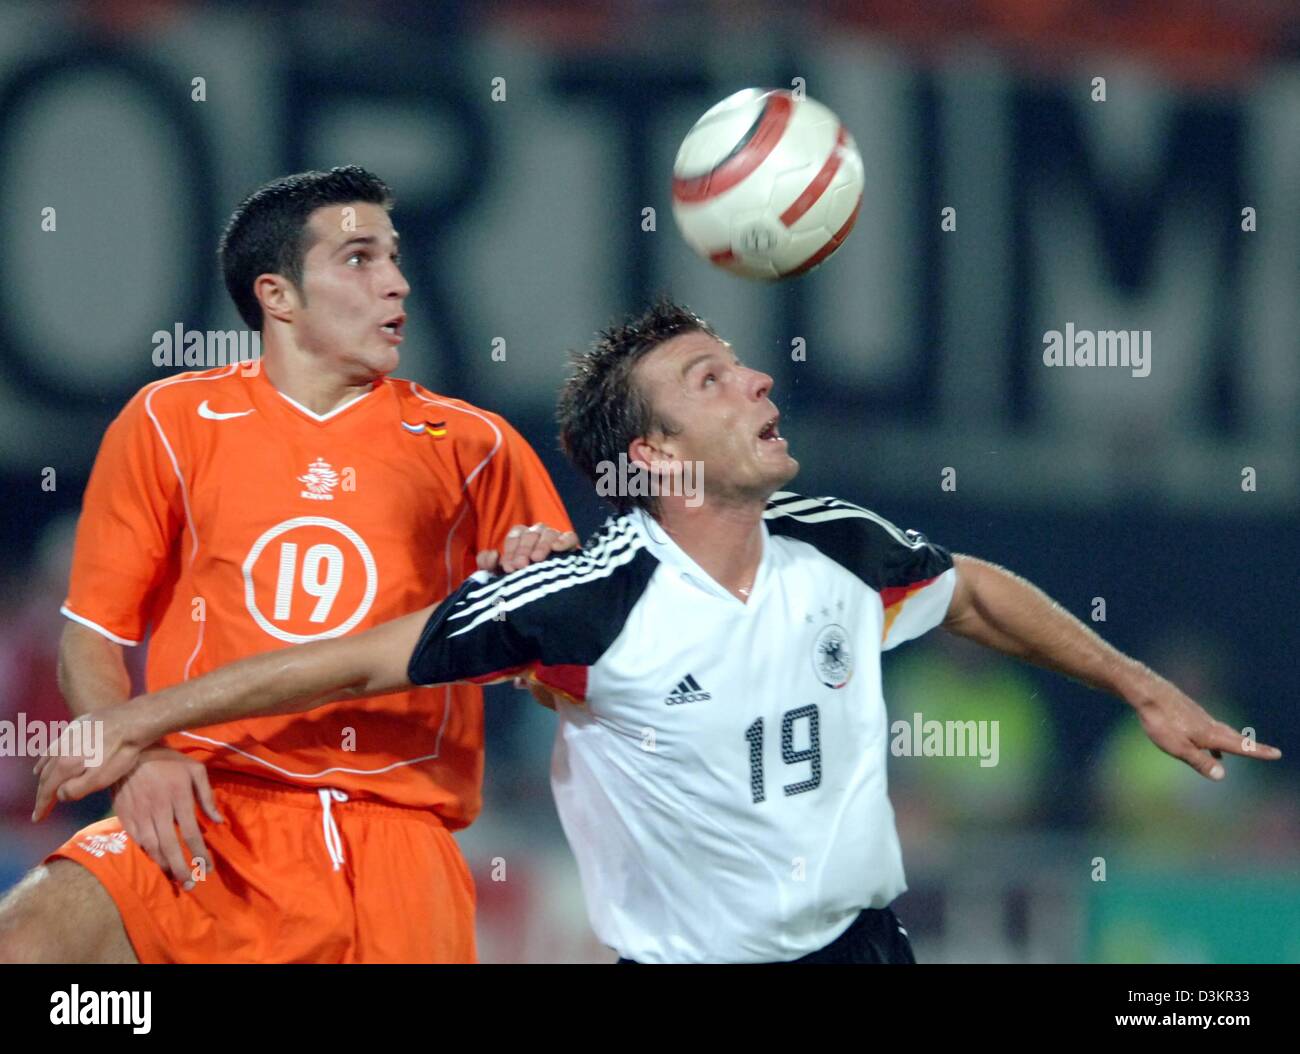 (dpa) - German national soccer player Bernd Schneider (R) fights for the ball with Dutch national player Robin van Persie during the friendly match Netherlands vs Germany at the 'De Kuip' stadium in Rotterdam, Netherlands, 17 August 2005. The game ended in a 2-2 draw. Photo: Bernd Weissbrod Stock Photo